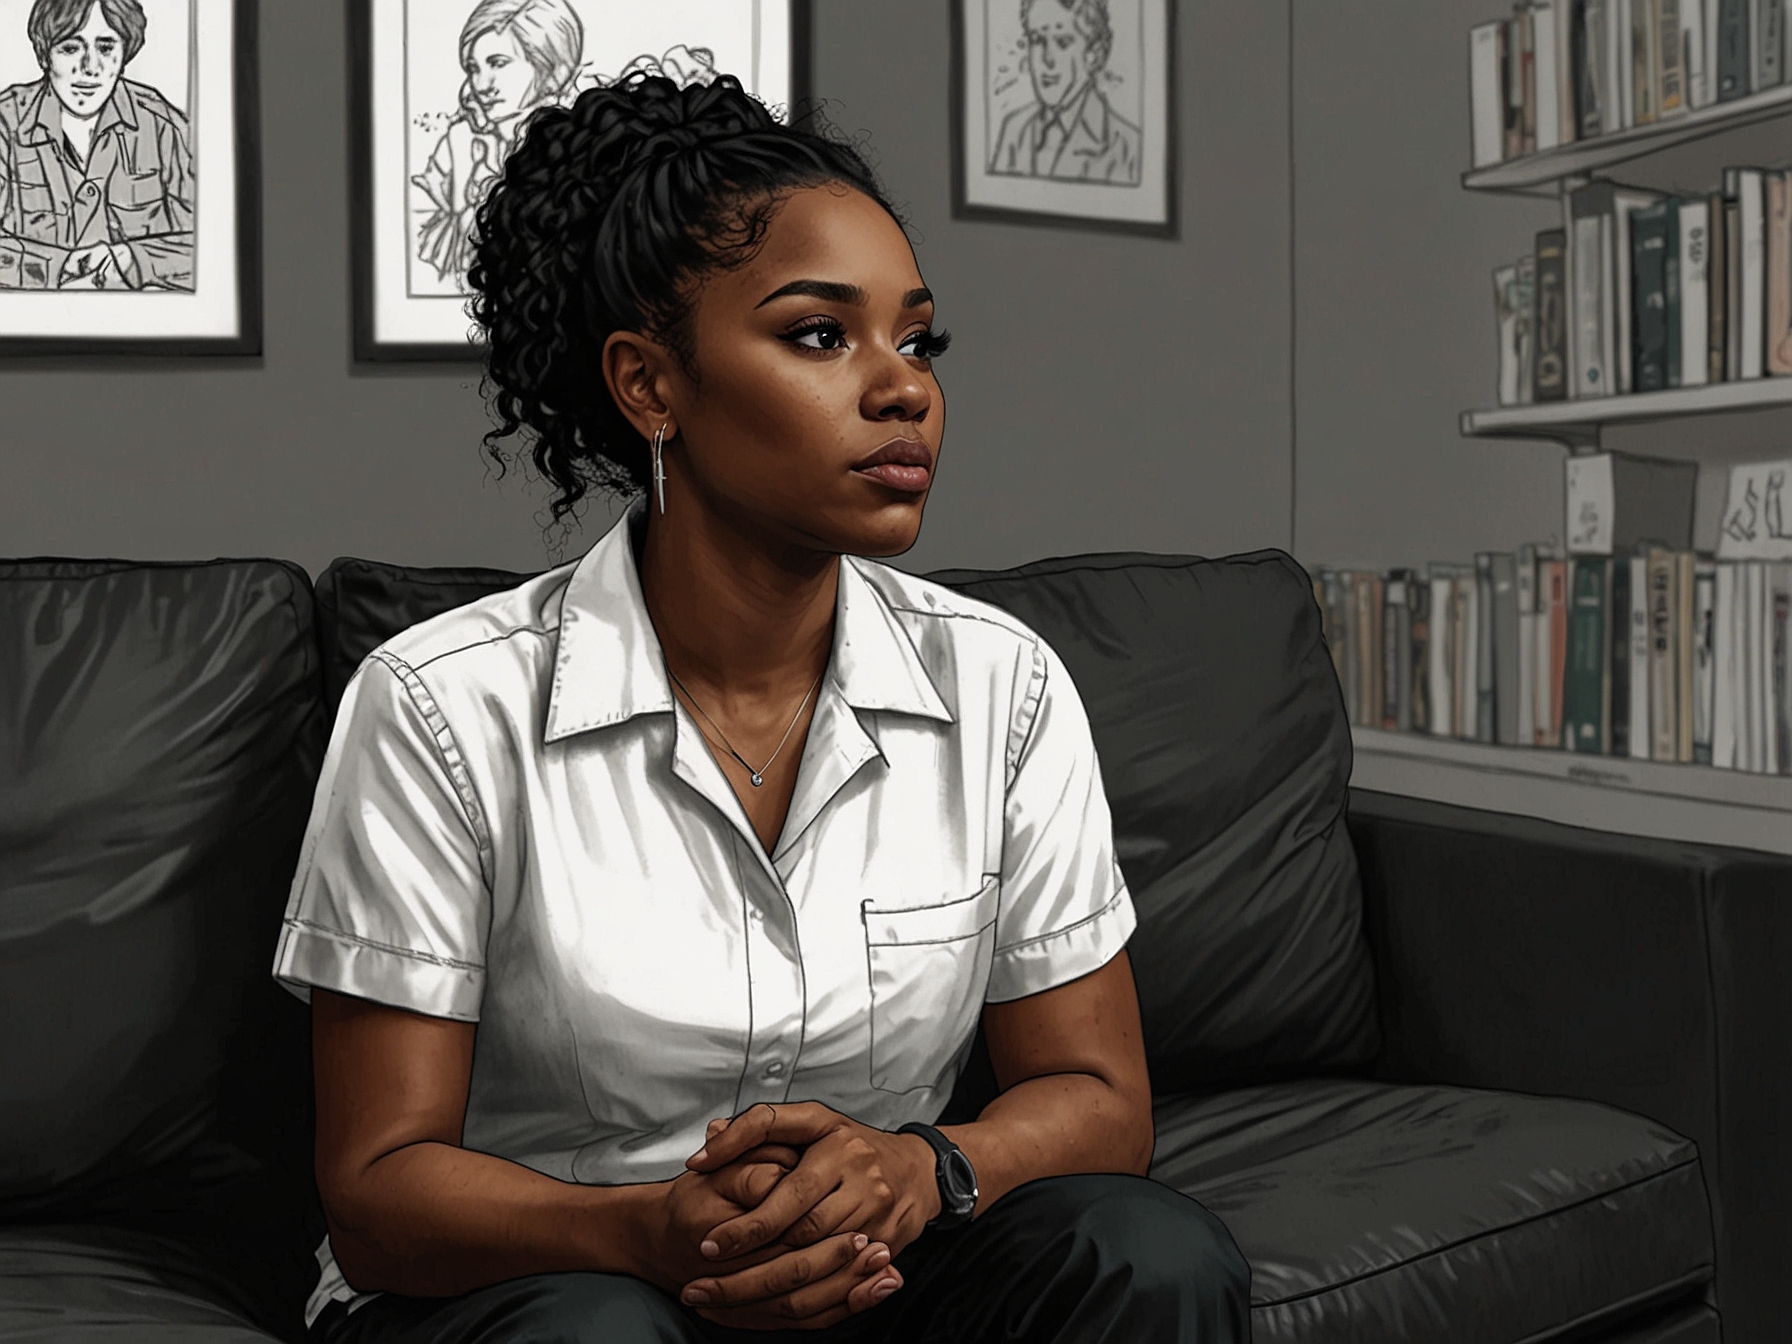 Alliyah and Shawn sit on a couch in an intense conversation. Alliyah, looking determined, tries to explain her desire for surgery, while Shawn appears concerned and pensive.